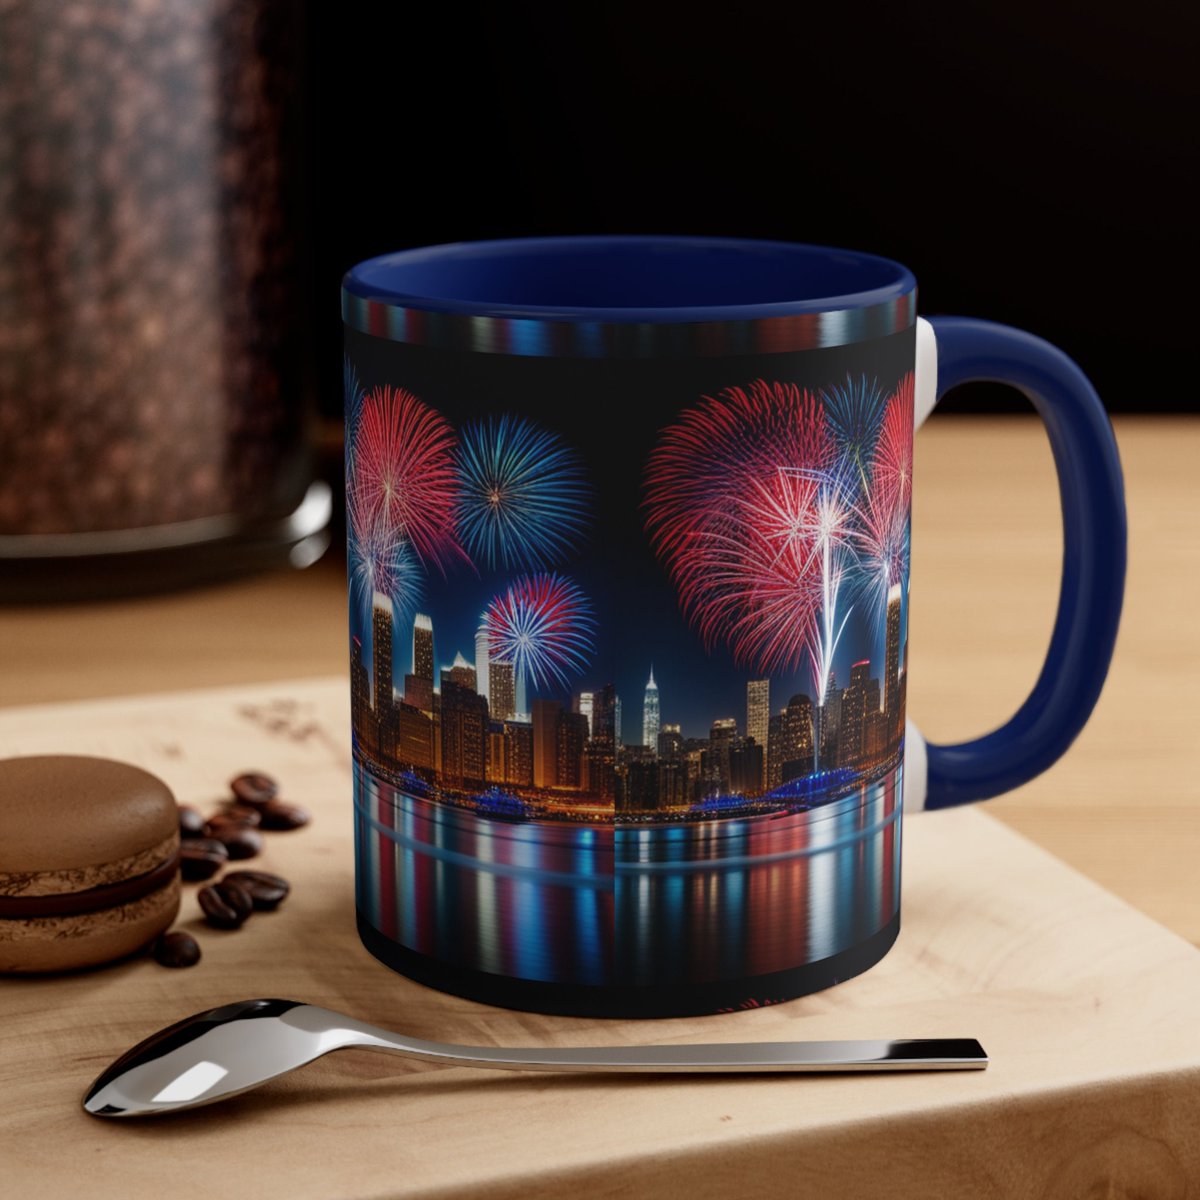 Excited to share the latest addition to my #etsy shop: Celebrating the 4th of July Accent Coffee Mug, 11oz etsy.me/3XCffS9 #coffeemugs #ceramicmugs #personalizedmugs #customizedmugs #funnymugs #uniquecoffeemugs #vintagecoffeemugs #noveltymugs #printedmugs